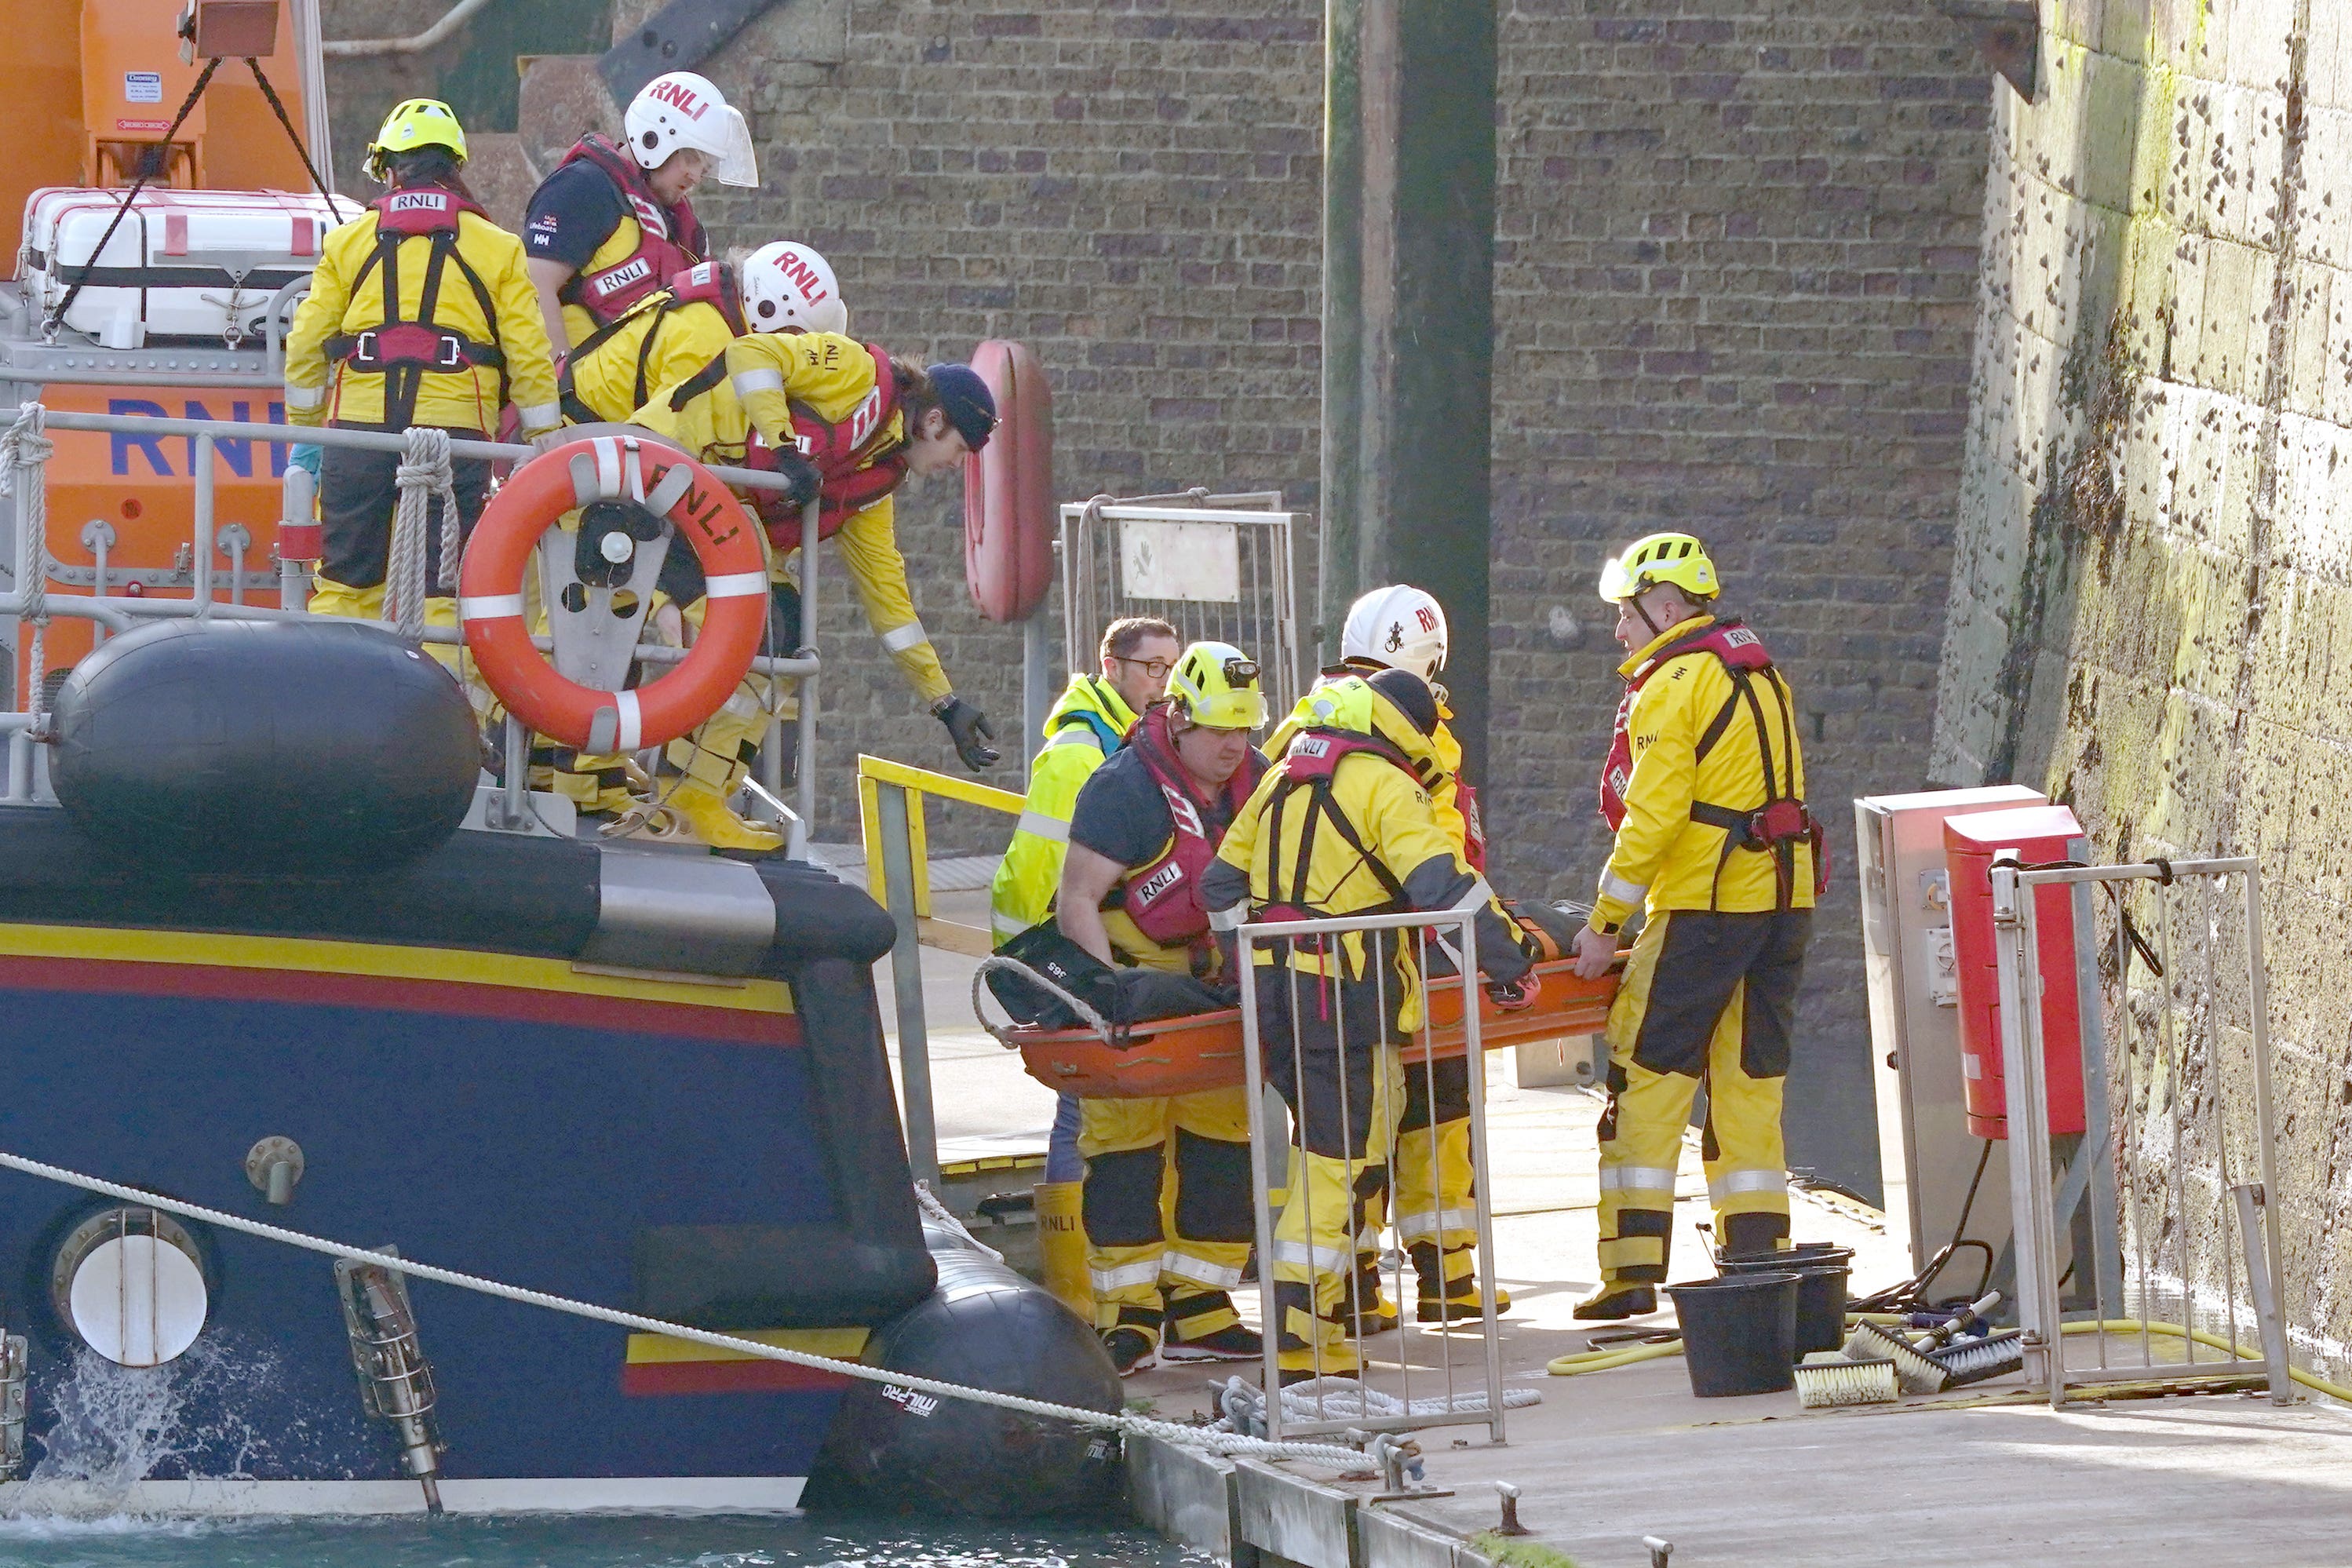 Members of the RNLI remove a stretcher and body bag from the Dover lifeboat after it returned to the port following a large search and rescue operation in the Channel (PA)